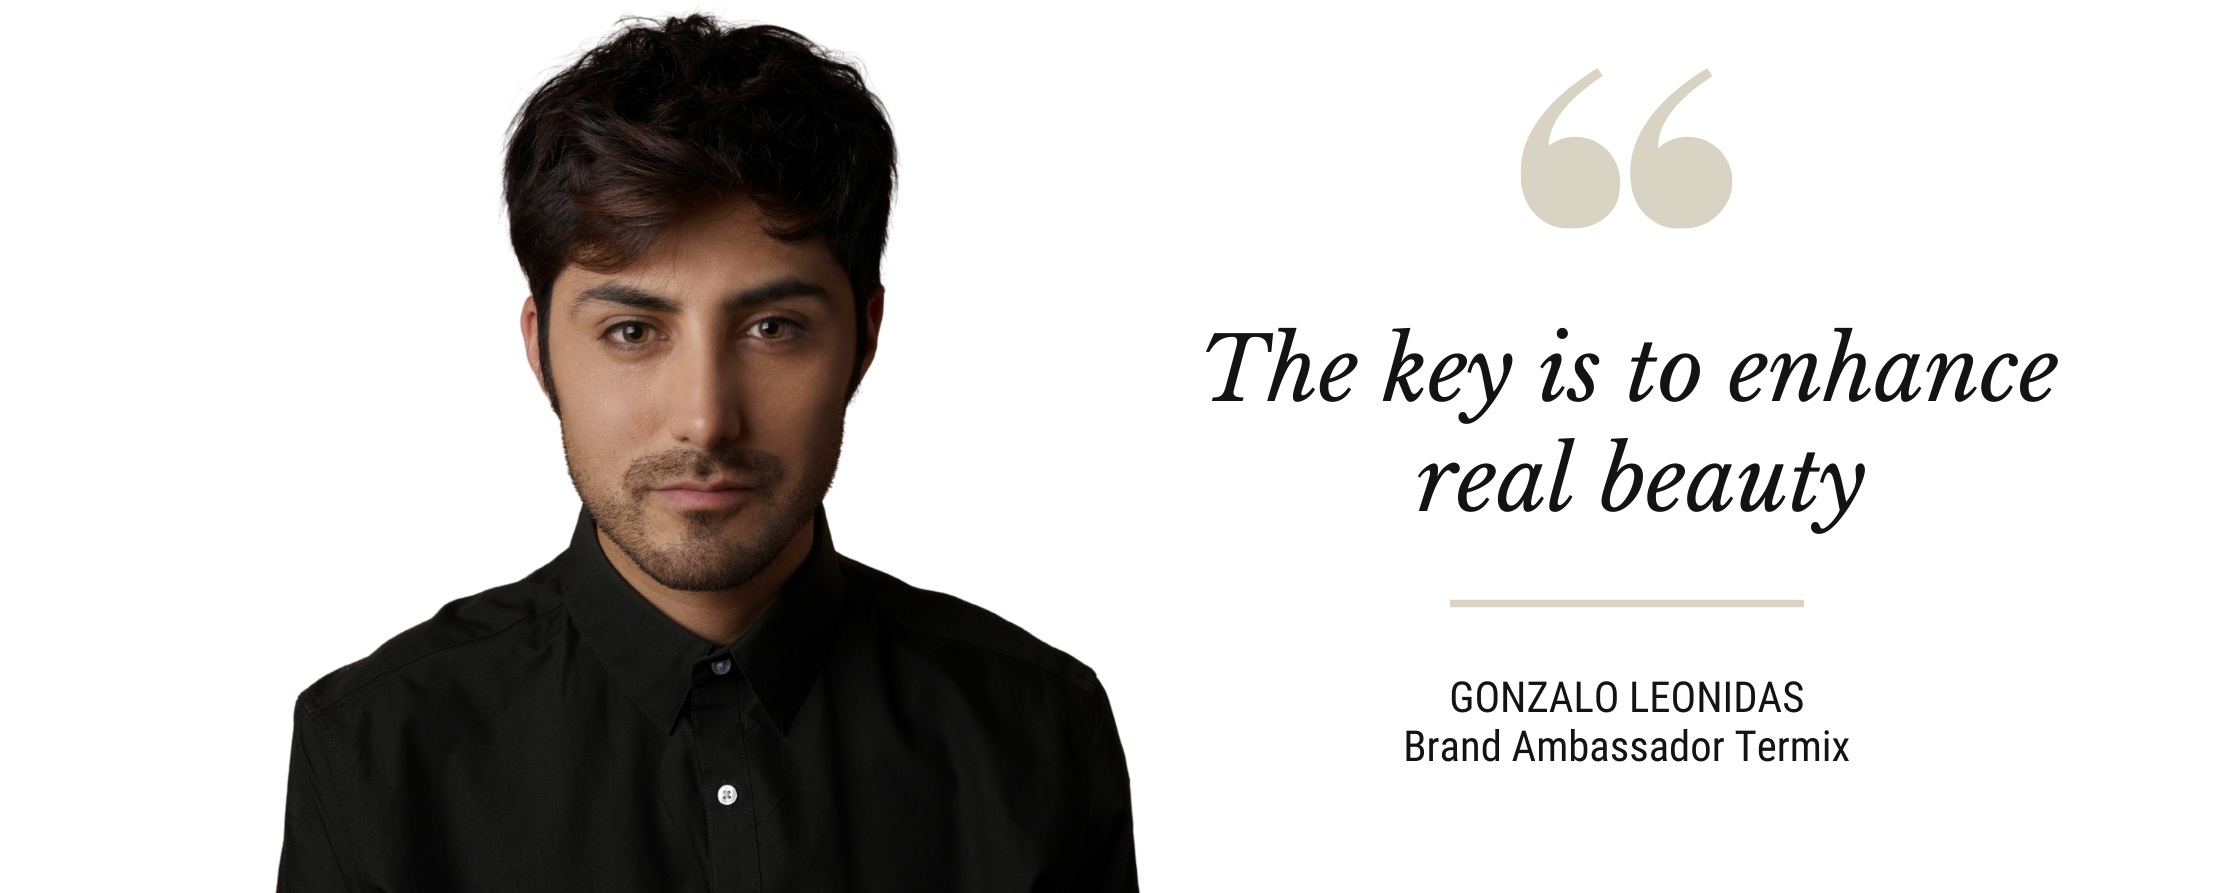 Real beauty, by brand ambassador of Termix Gonzalo Leonidas